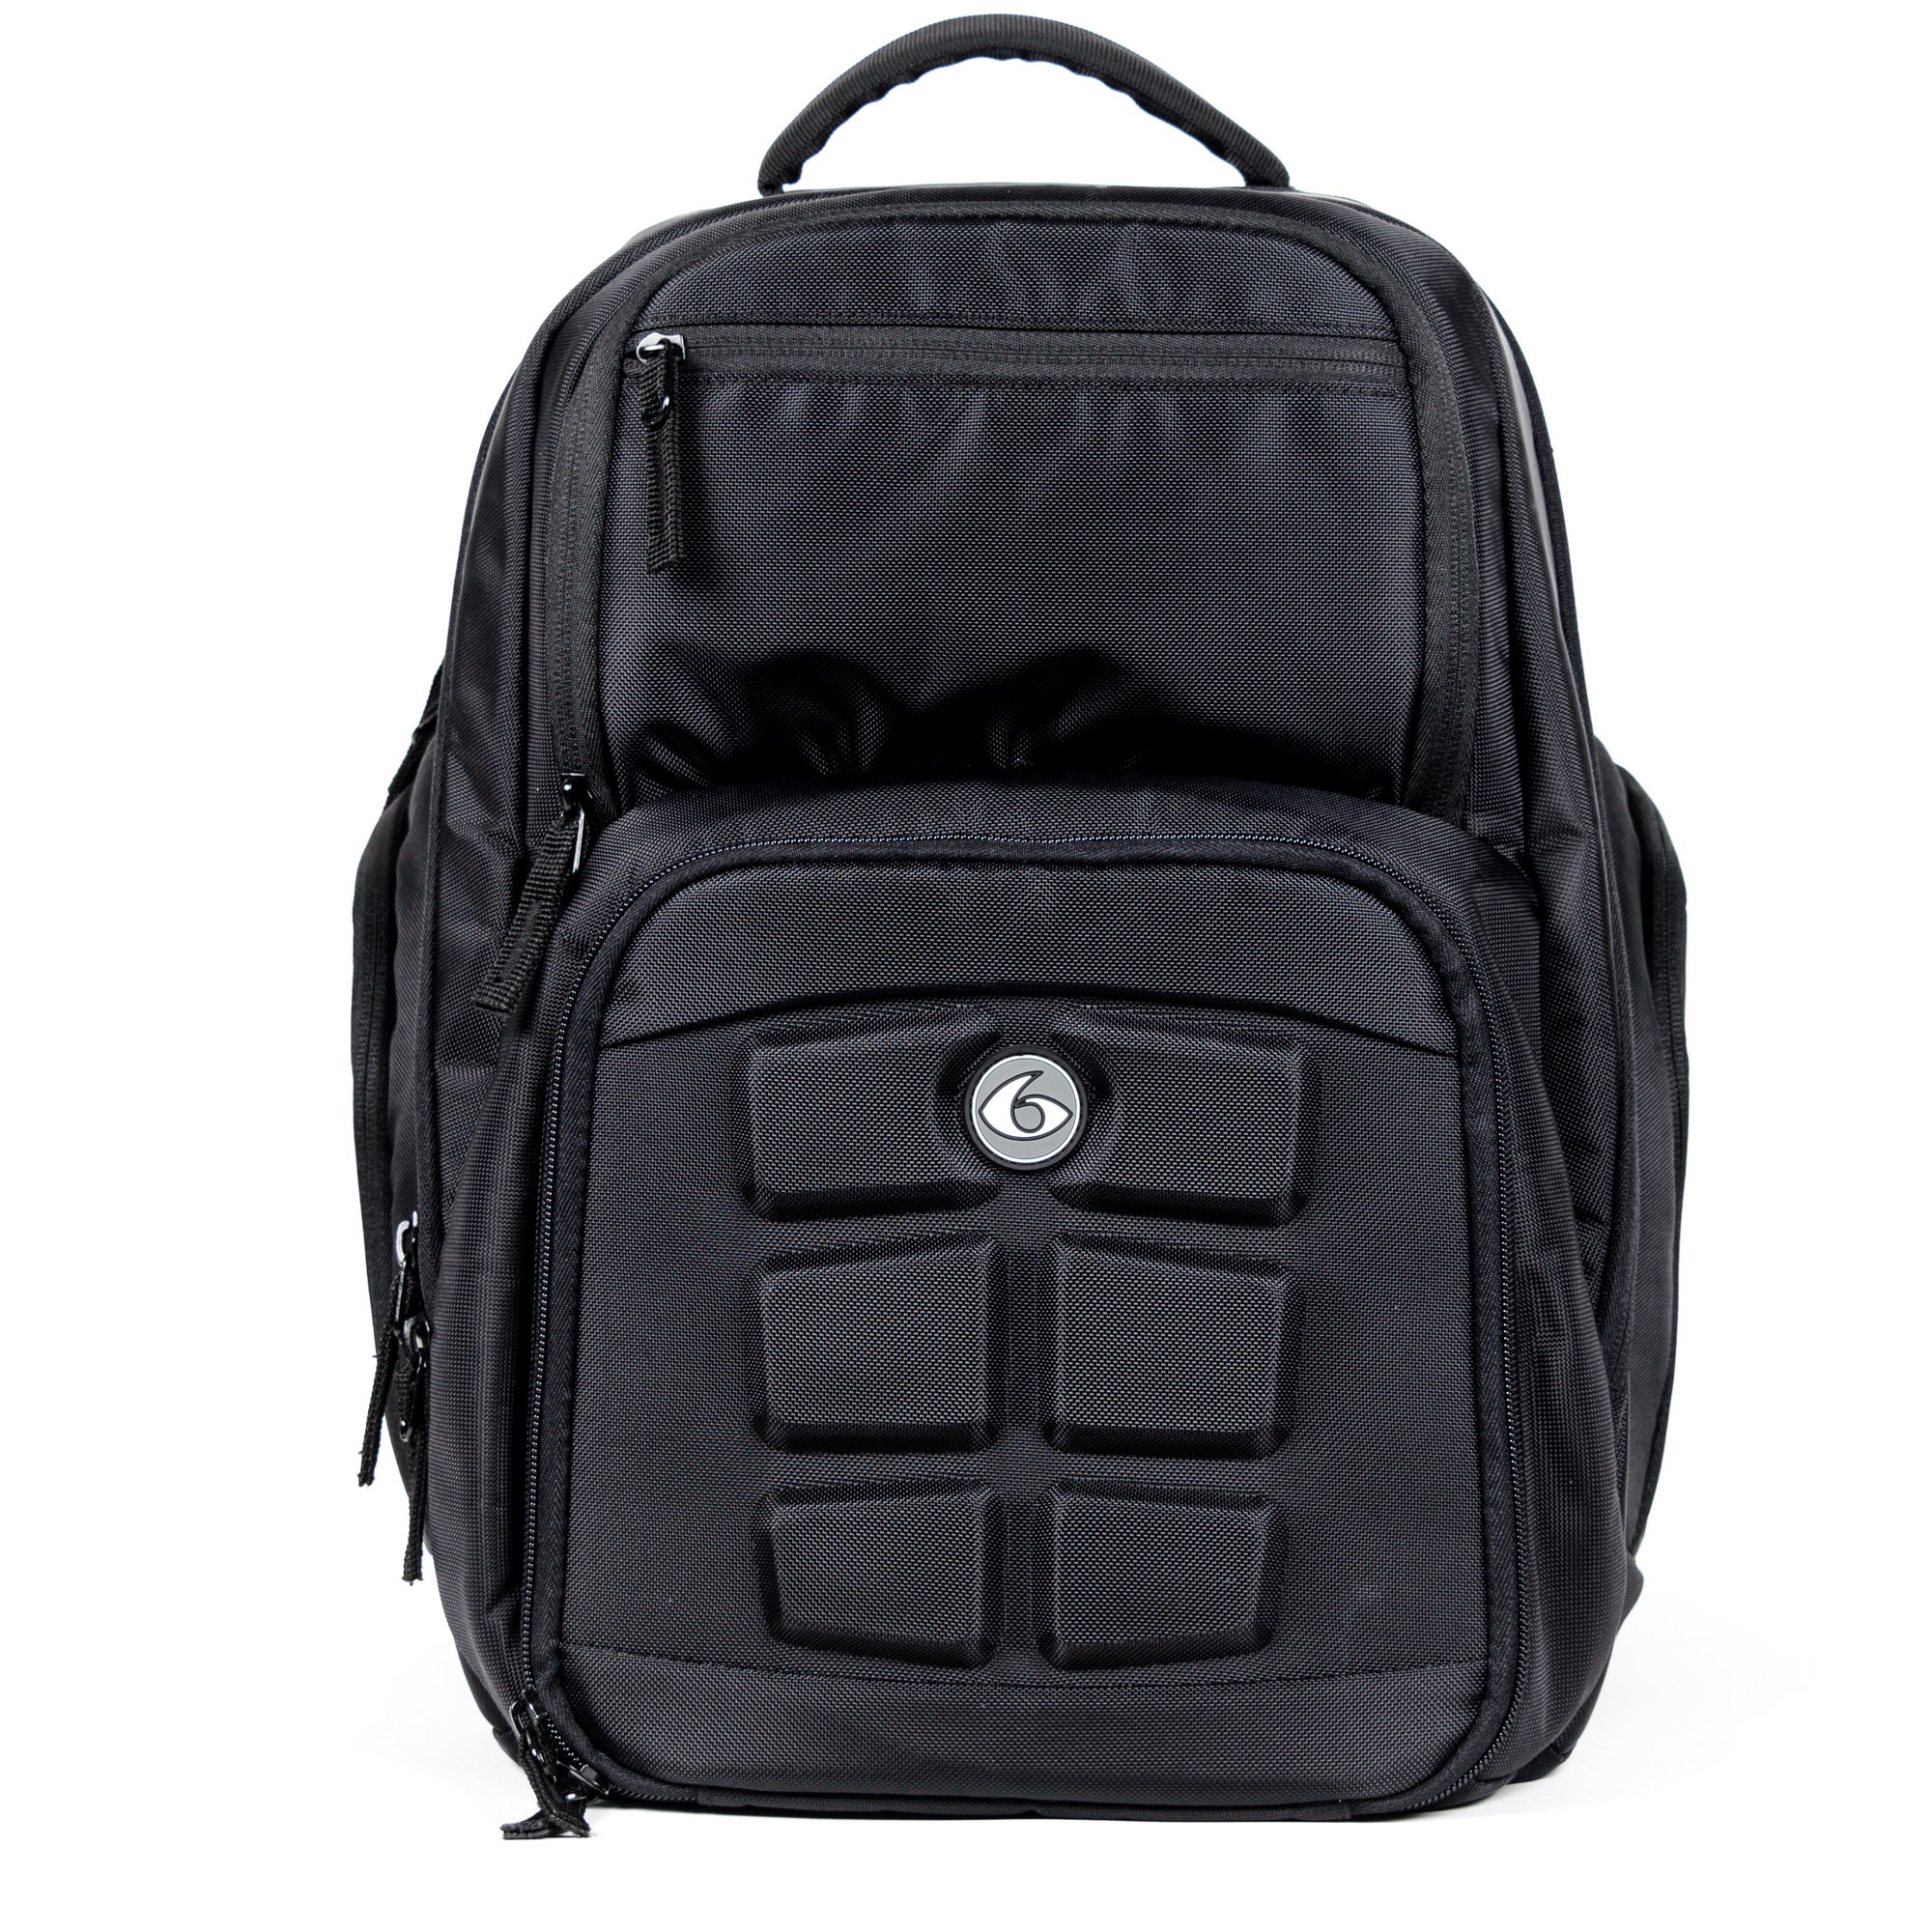 6 Pack Fitness Expedition Backpack 300 (рюкзак)